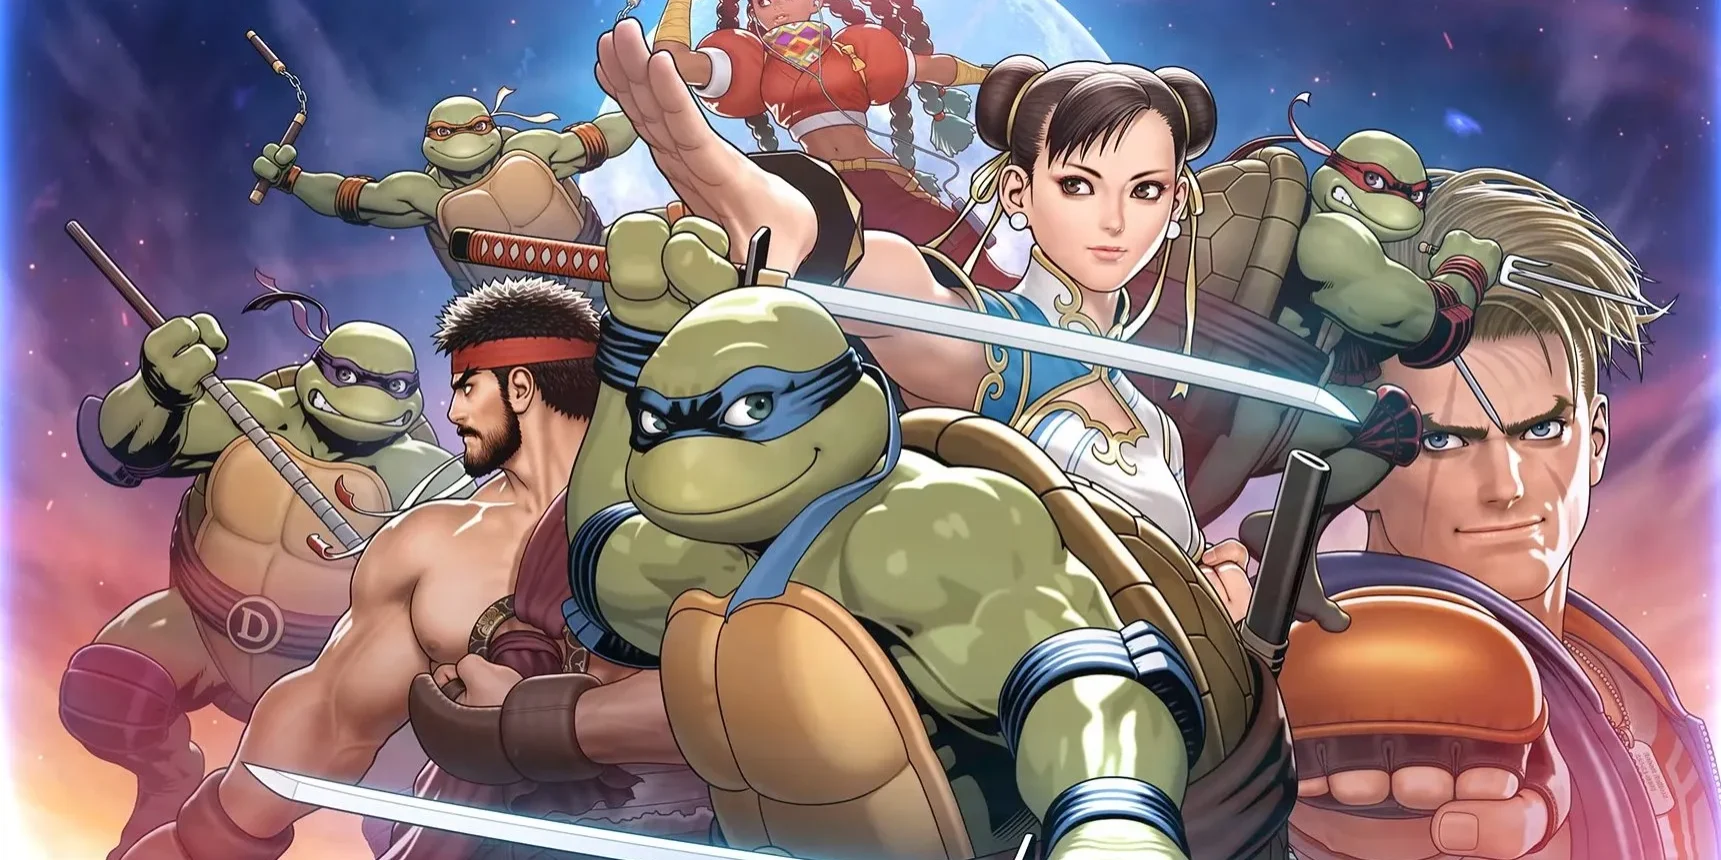 Street Fighter 6 shadow drops Teenage Mutant Ninja Turtle crossover alongside new character announcement